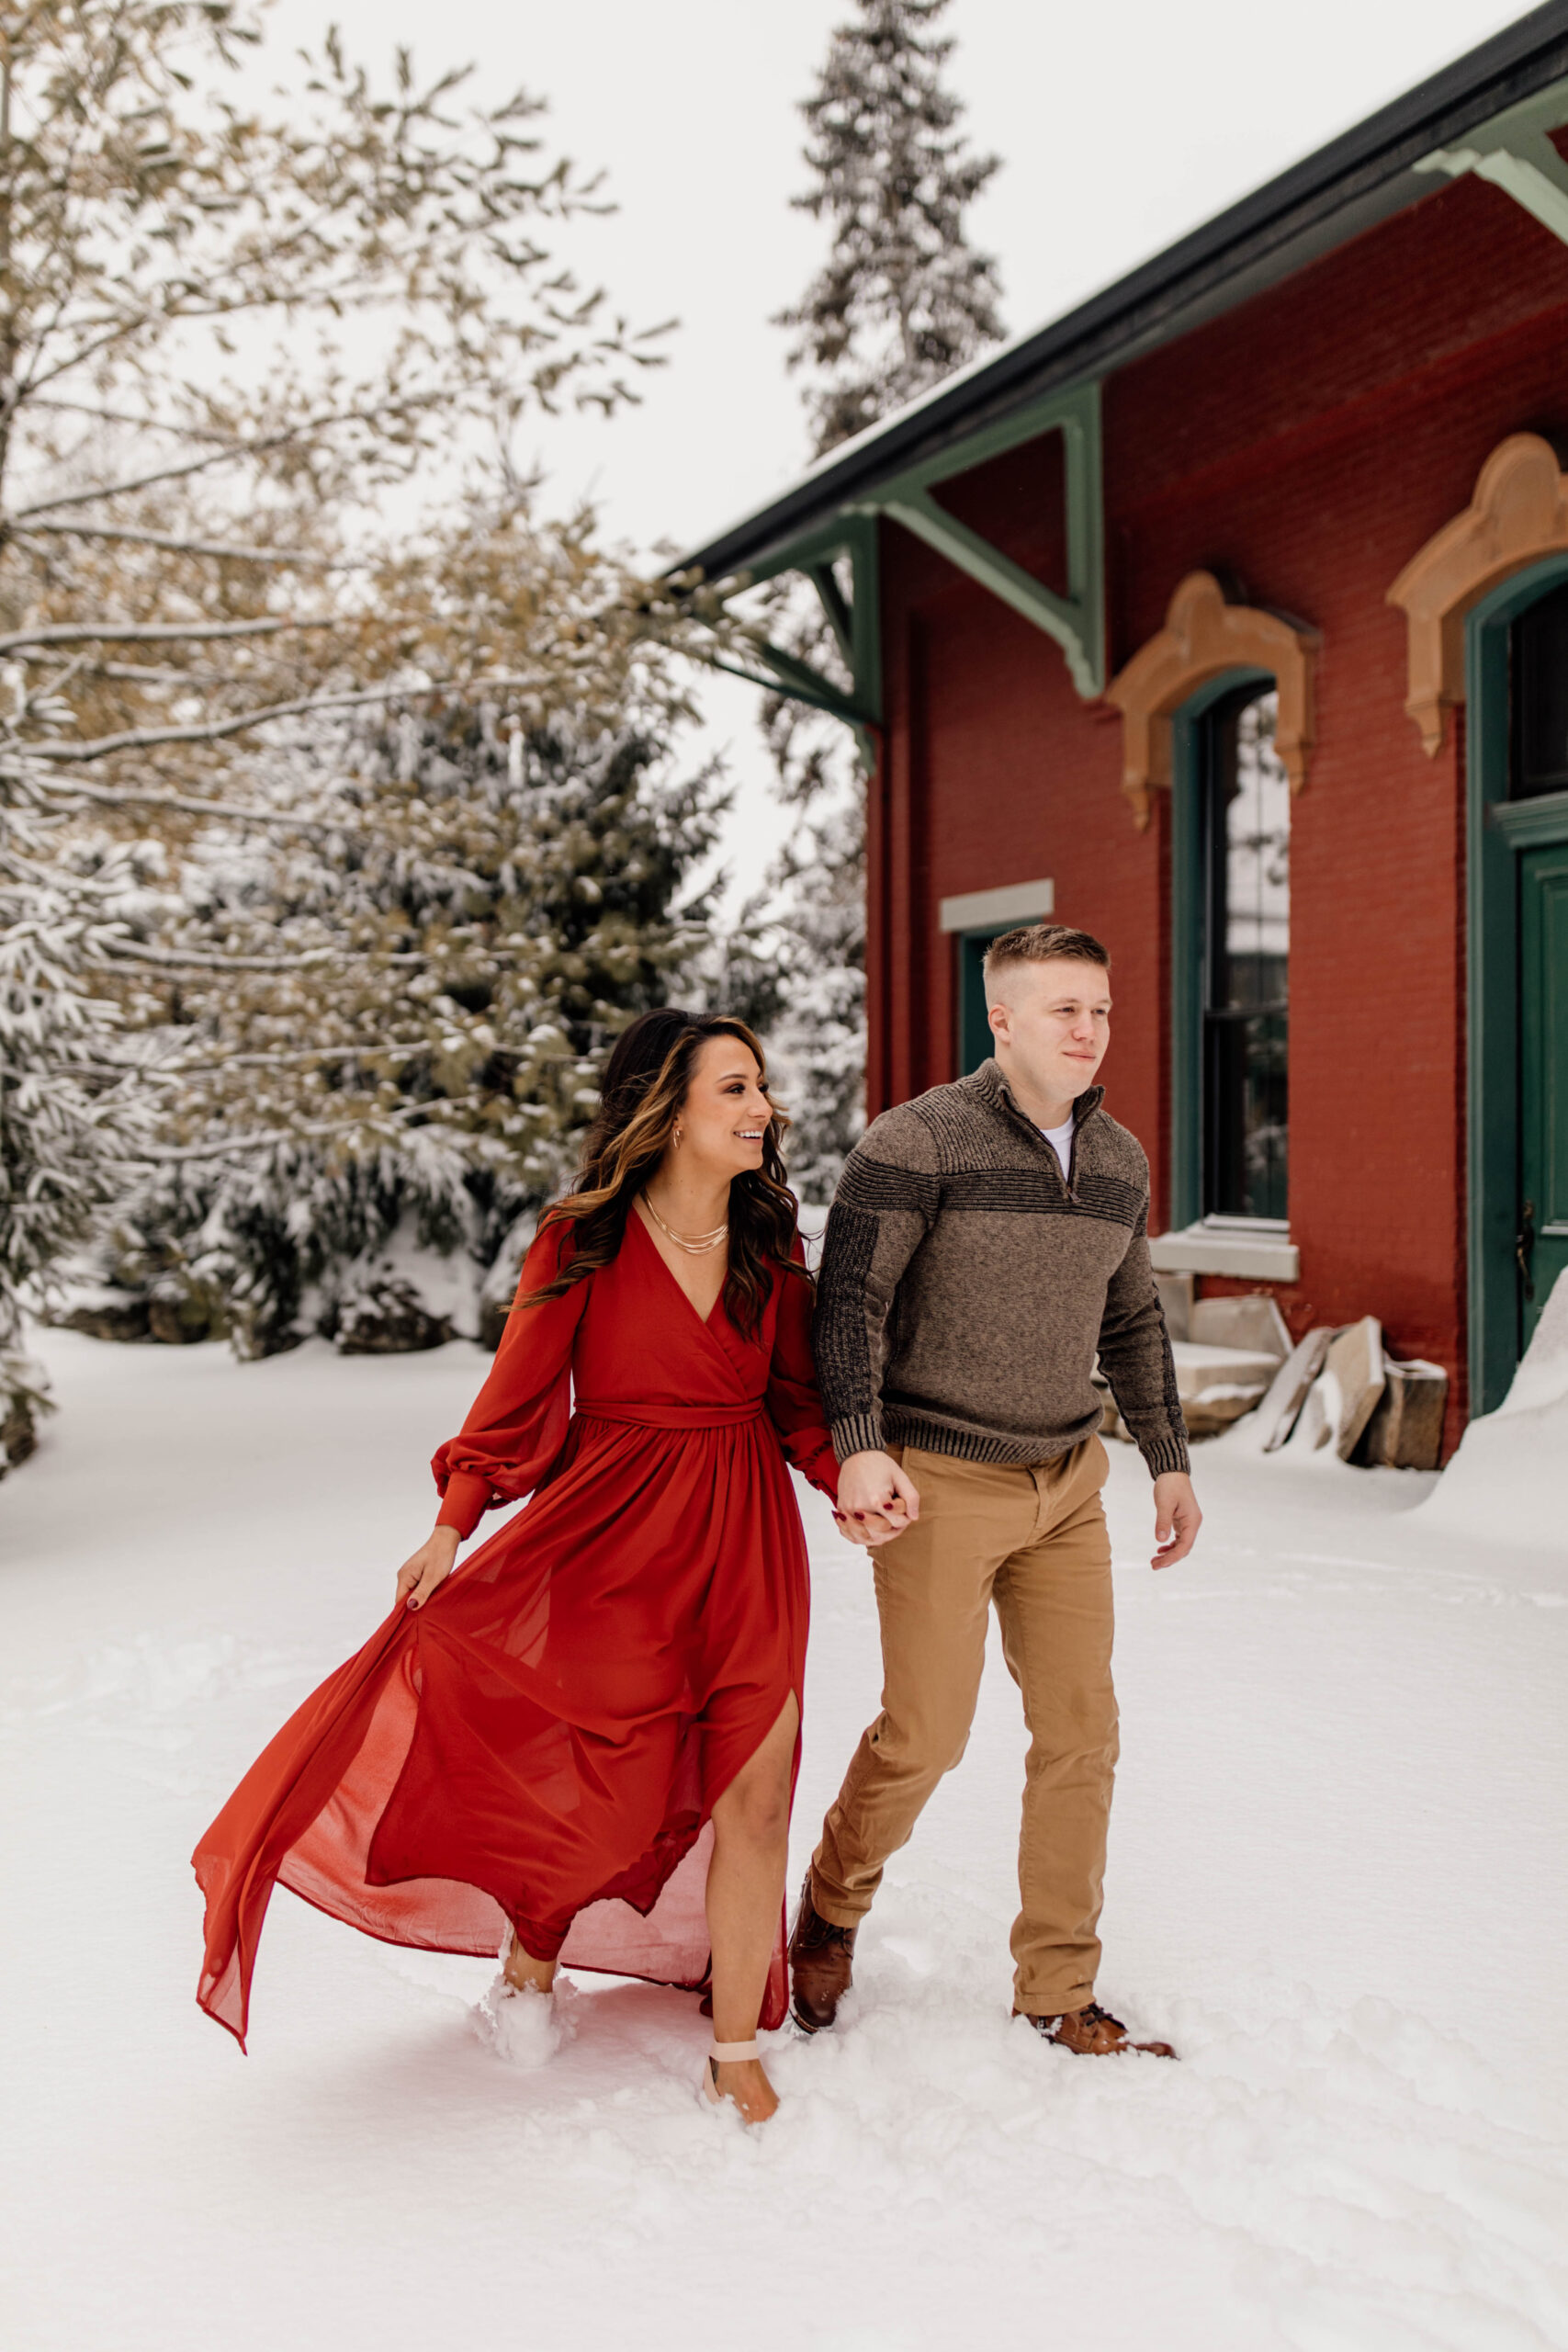 Engaged Couple Walking In Snow